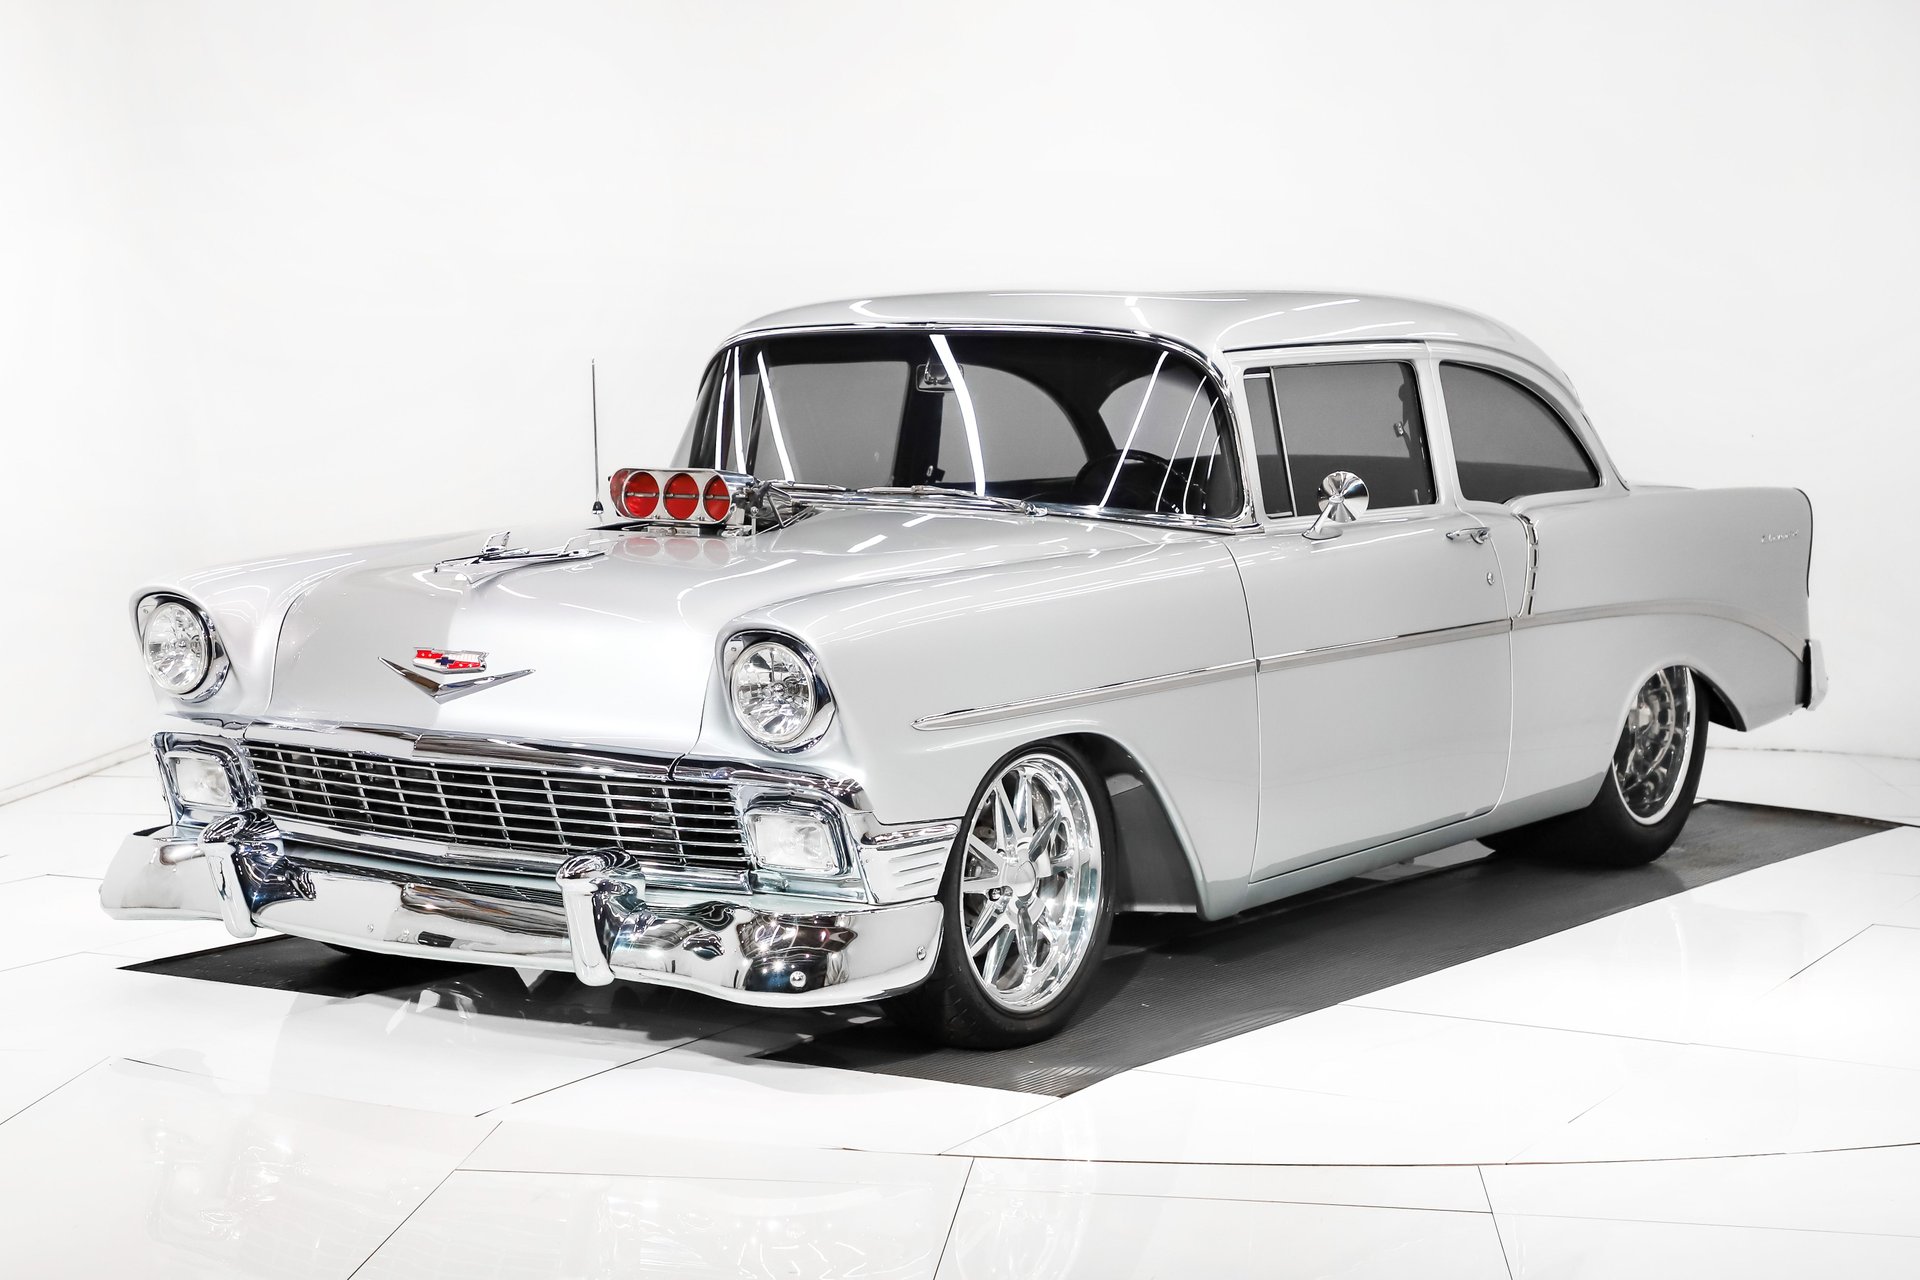 1956 Chevrolet 150 – A 1,000 HP Classic Muscle Car